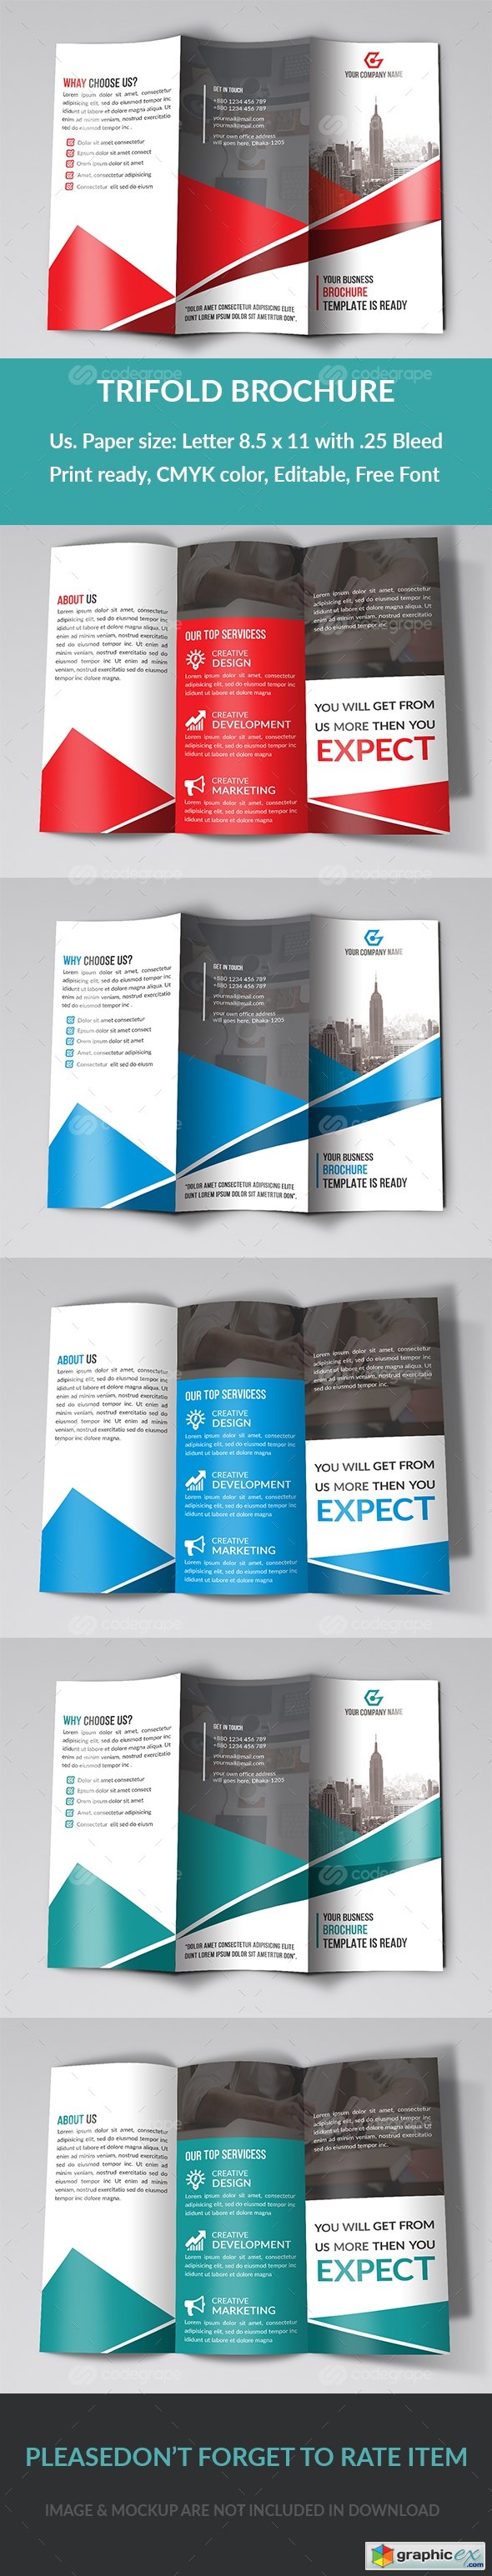 Trifold Brochure 9909